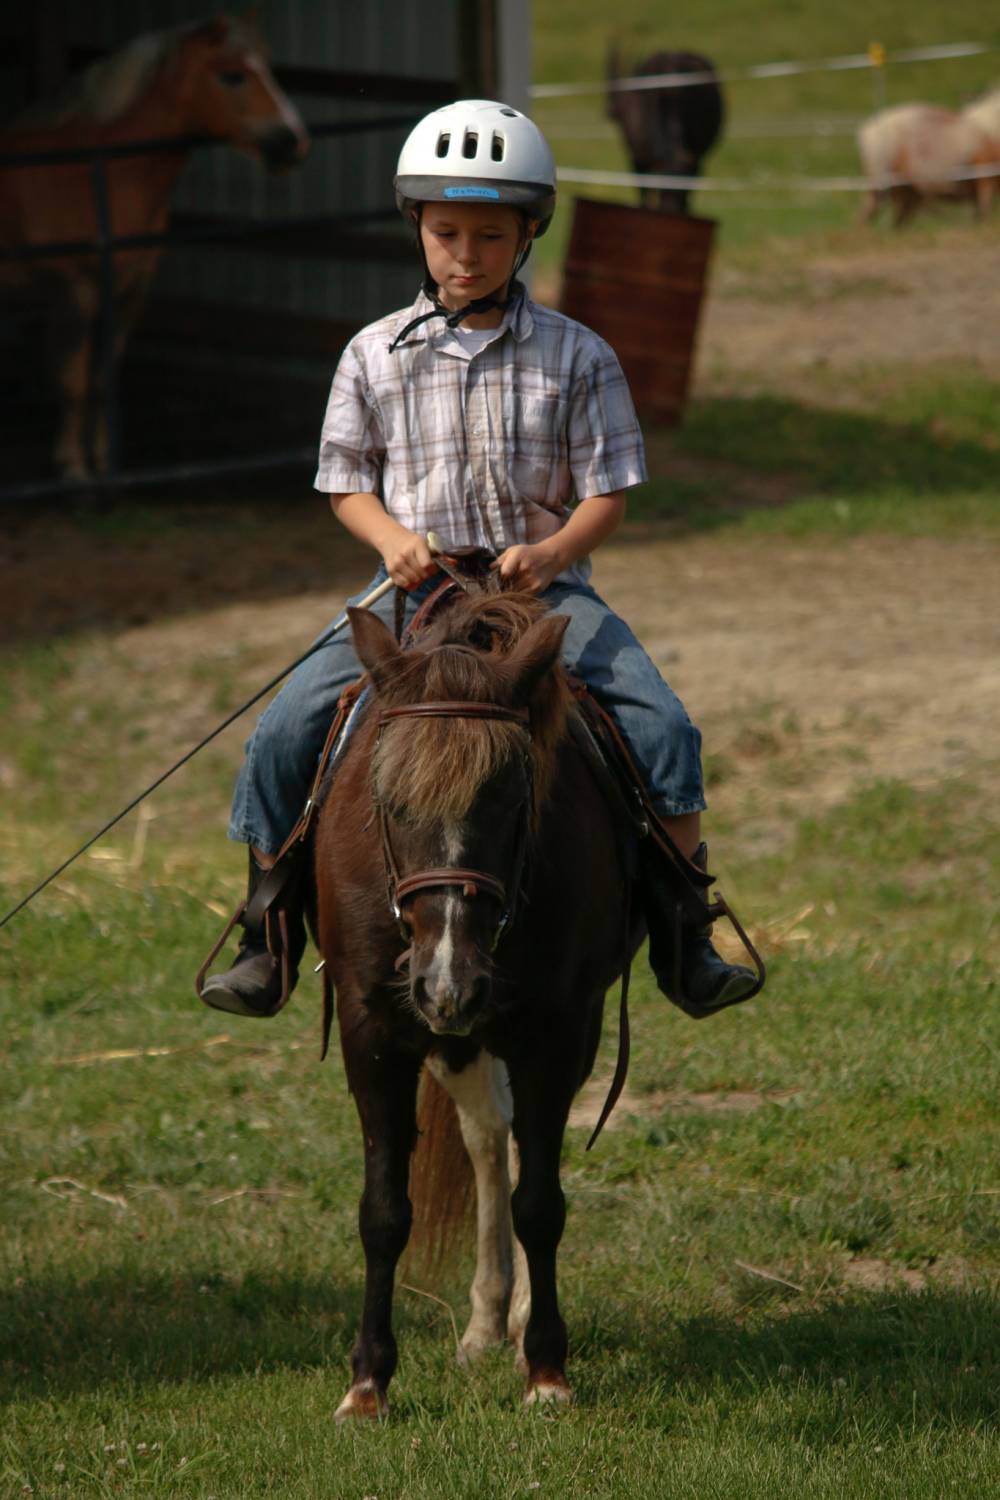 TOP PENNSYLVANIA SUMMER CAMP: Fairview Farm and Guest Ranch - Rough Riders Girl s Camp is a Top Summer Camp located in Granville Summit Pennsylvania offering many fun and enriching camp programs. 